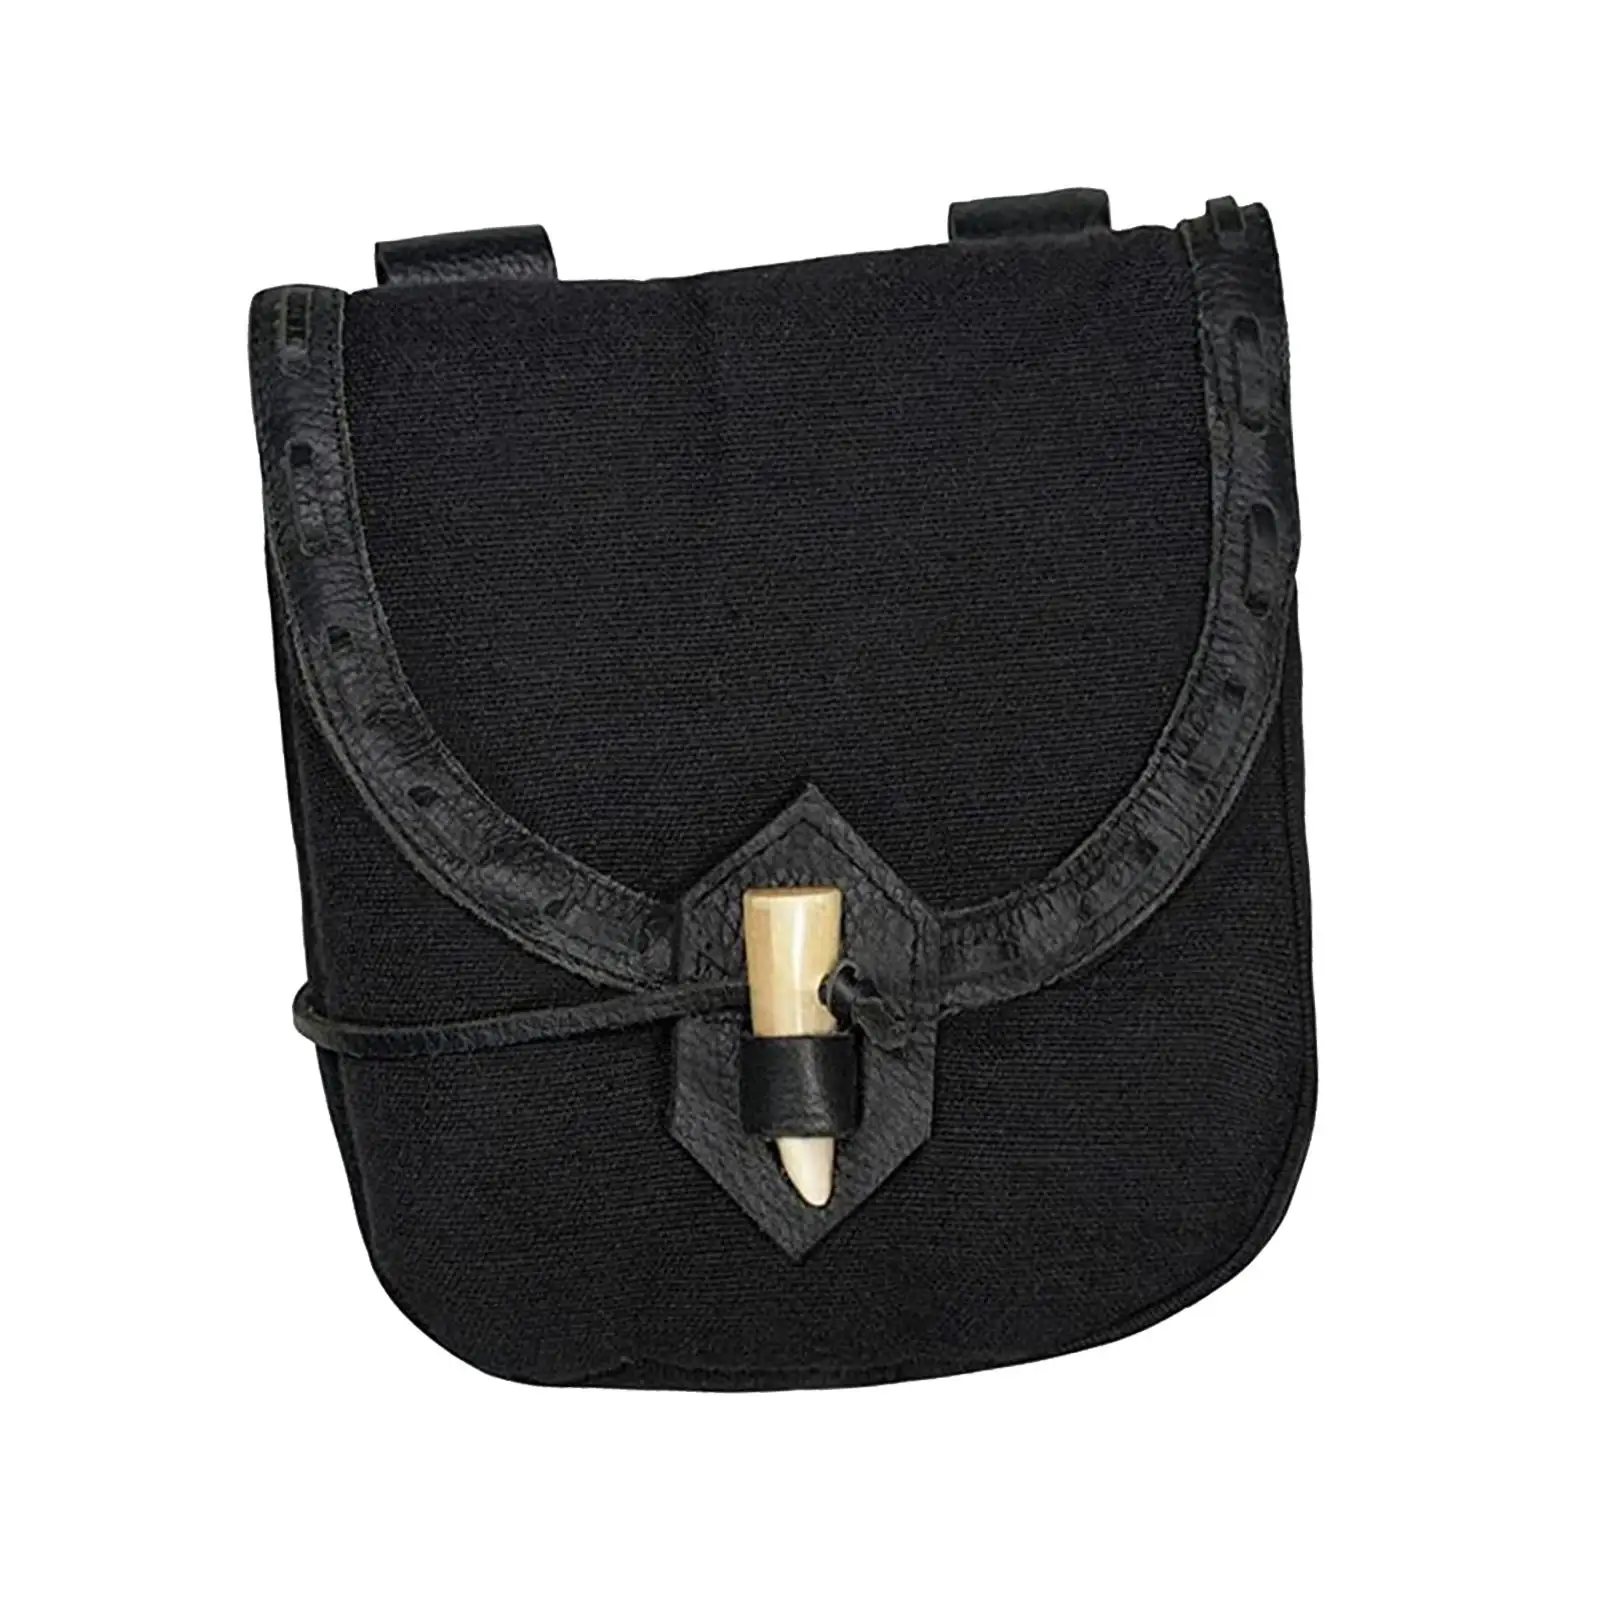 Canvas Medieval Belt Pouch Durable Wear Resistant Big Capacity Cosplay Costume Fanny Pack Waist Bag Costume Accessories